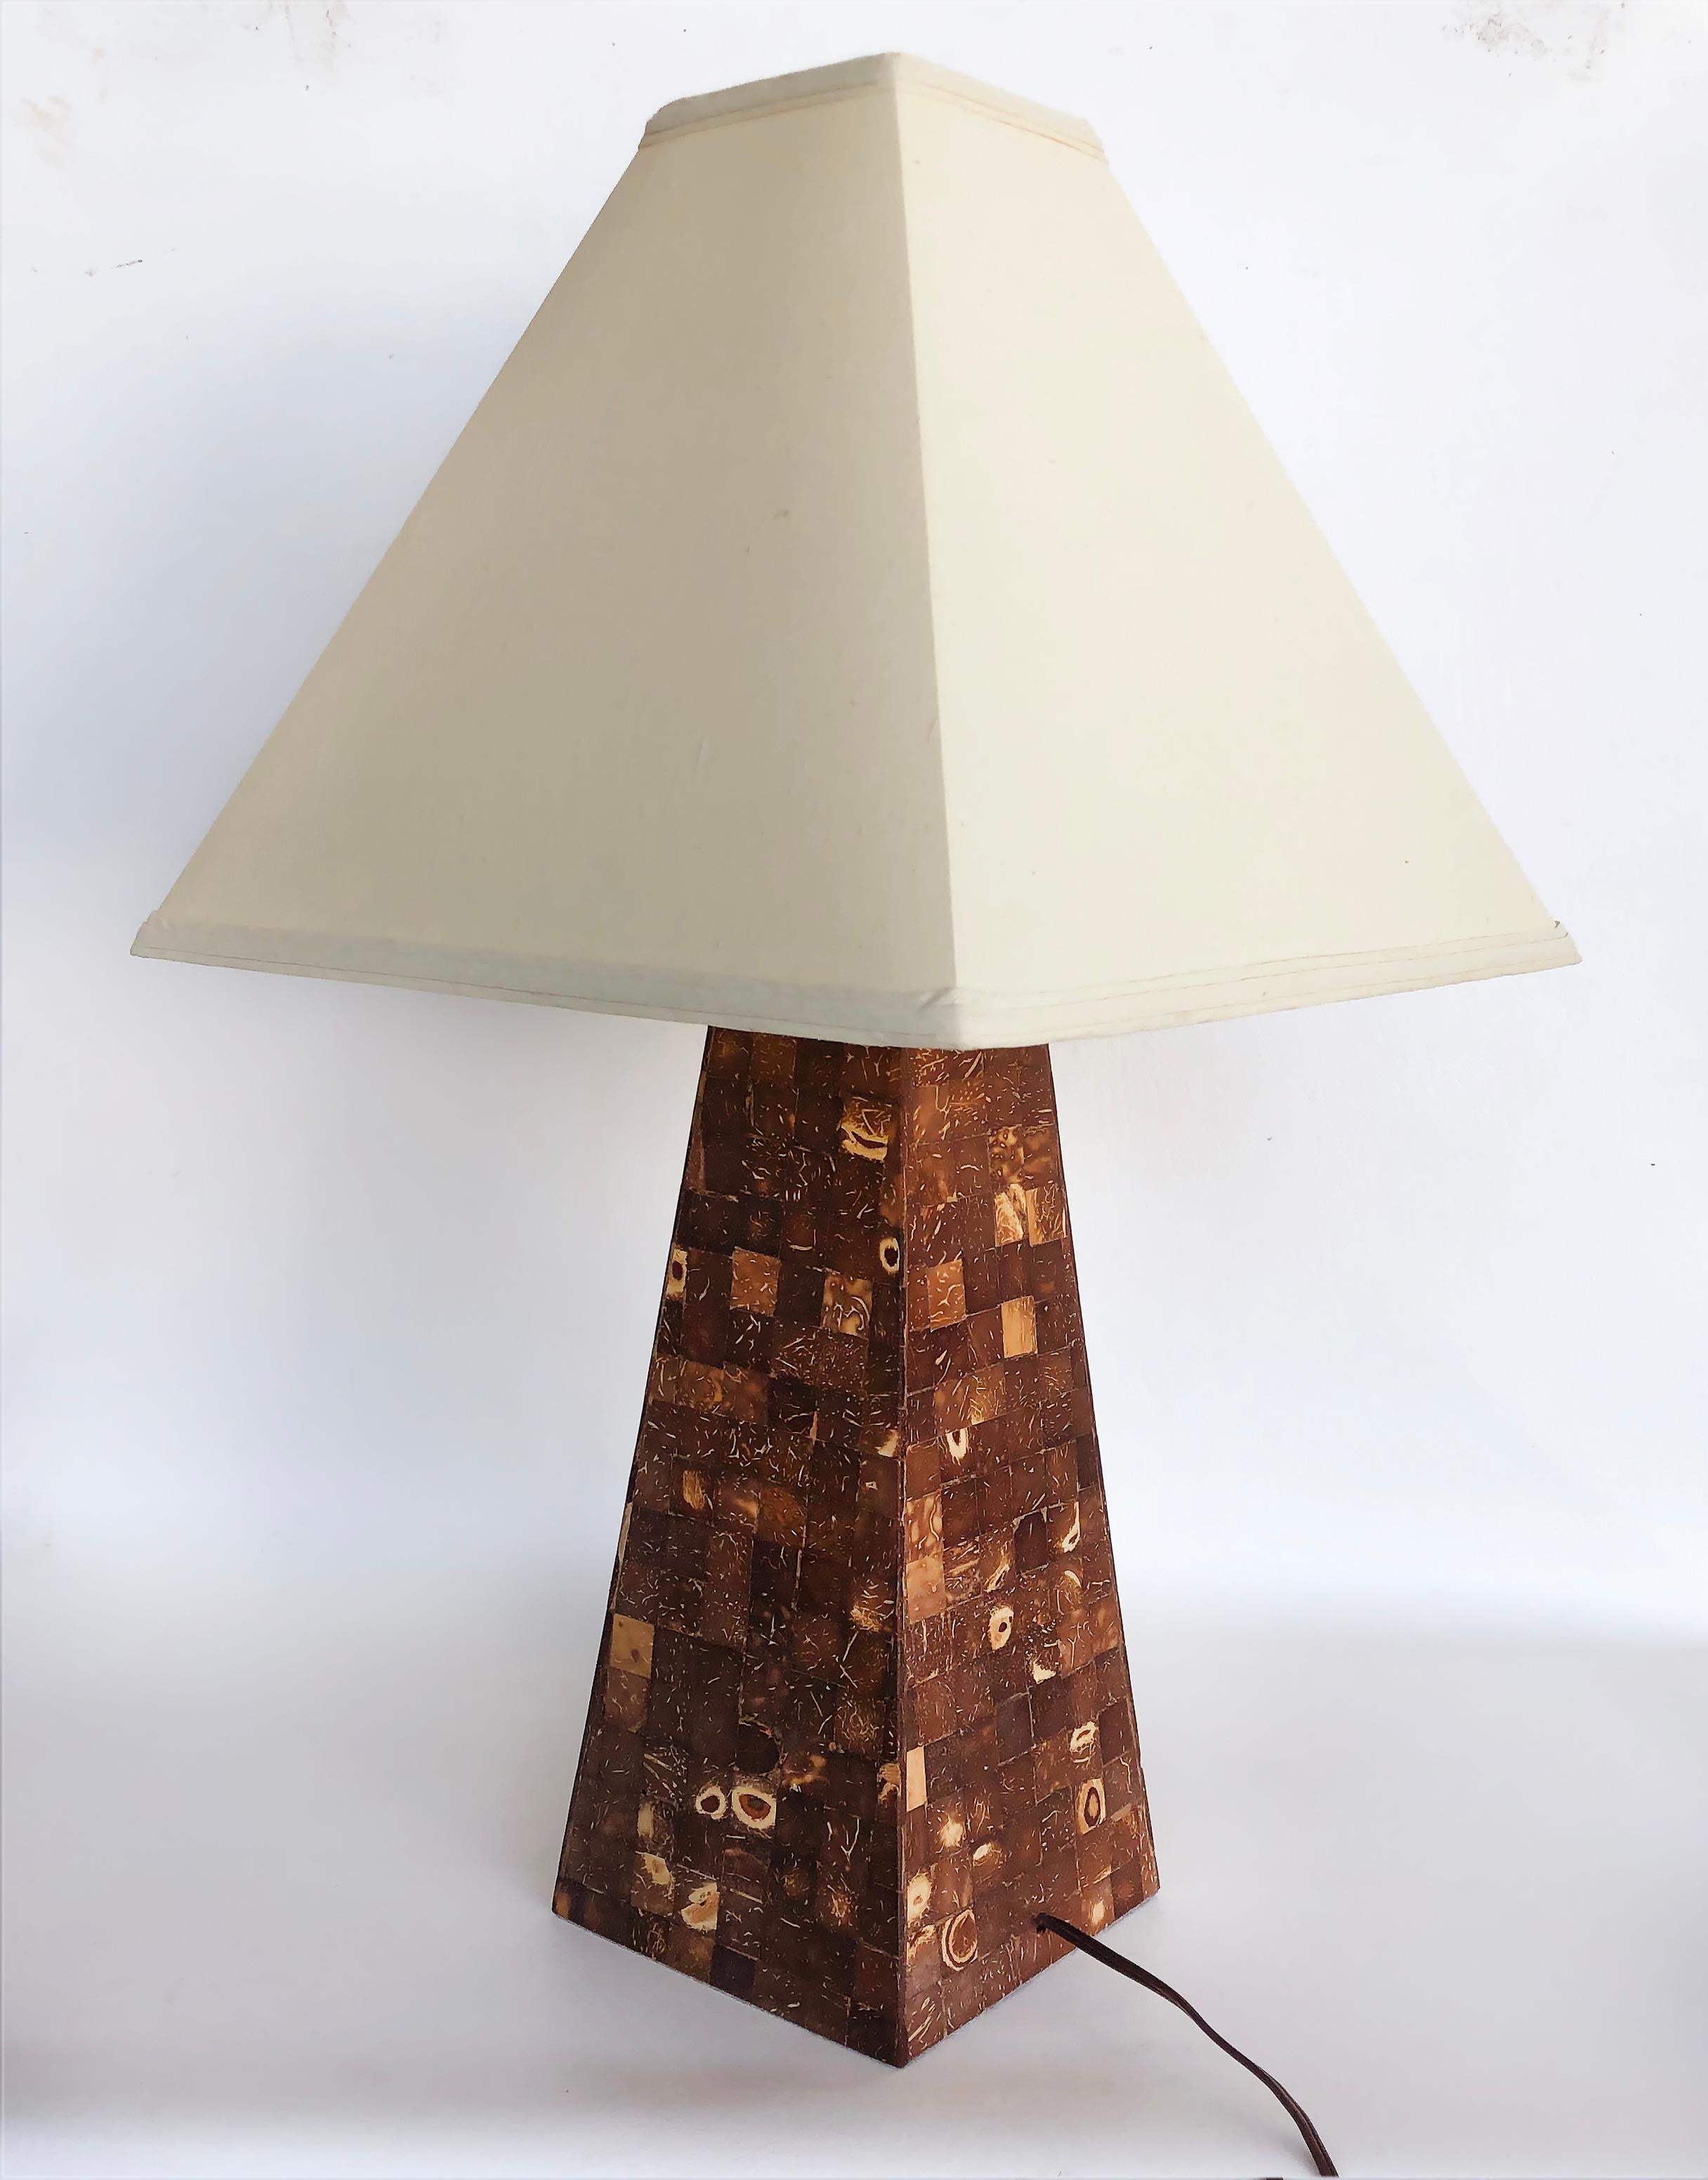 Vintage Tessellated coconut shell table lamp

Offered for sale is a vintage tapered column form table lamp that this clad in polished tessellated coconut shell tiles. The lamp is elegant and will work nicely in many design settings. The lamp is